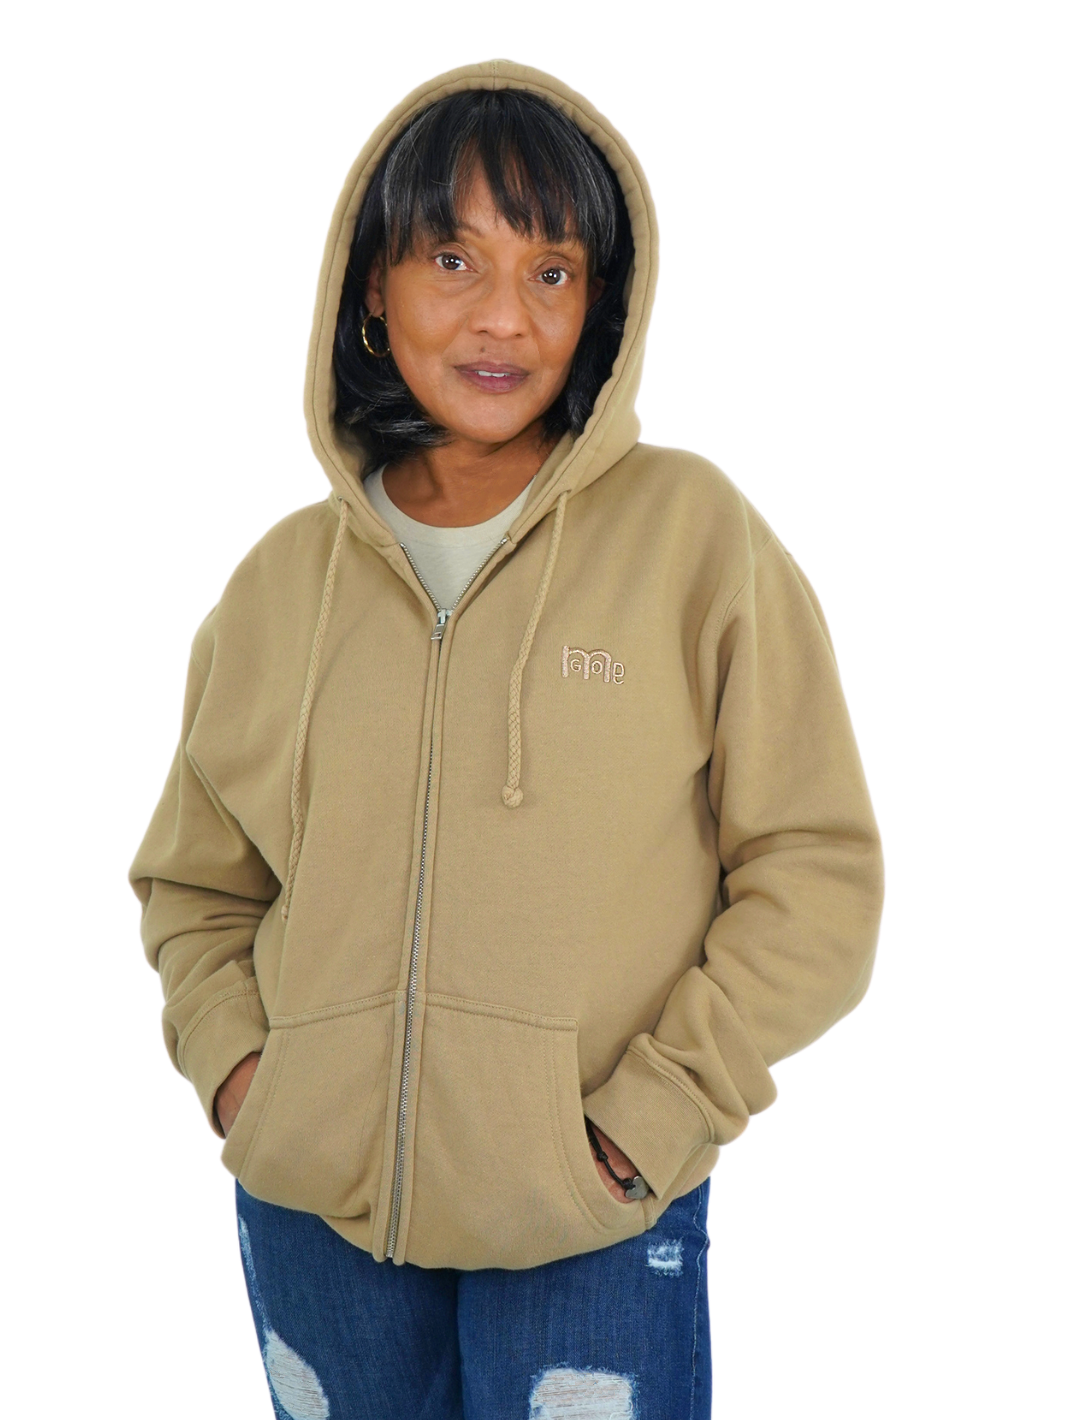 Sandstone color Full Zip Hoodie with tone on tone embroidered GODinme logo at left chest